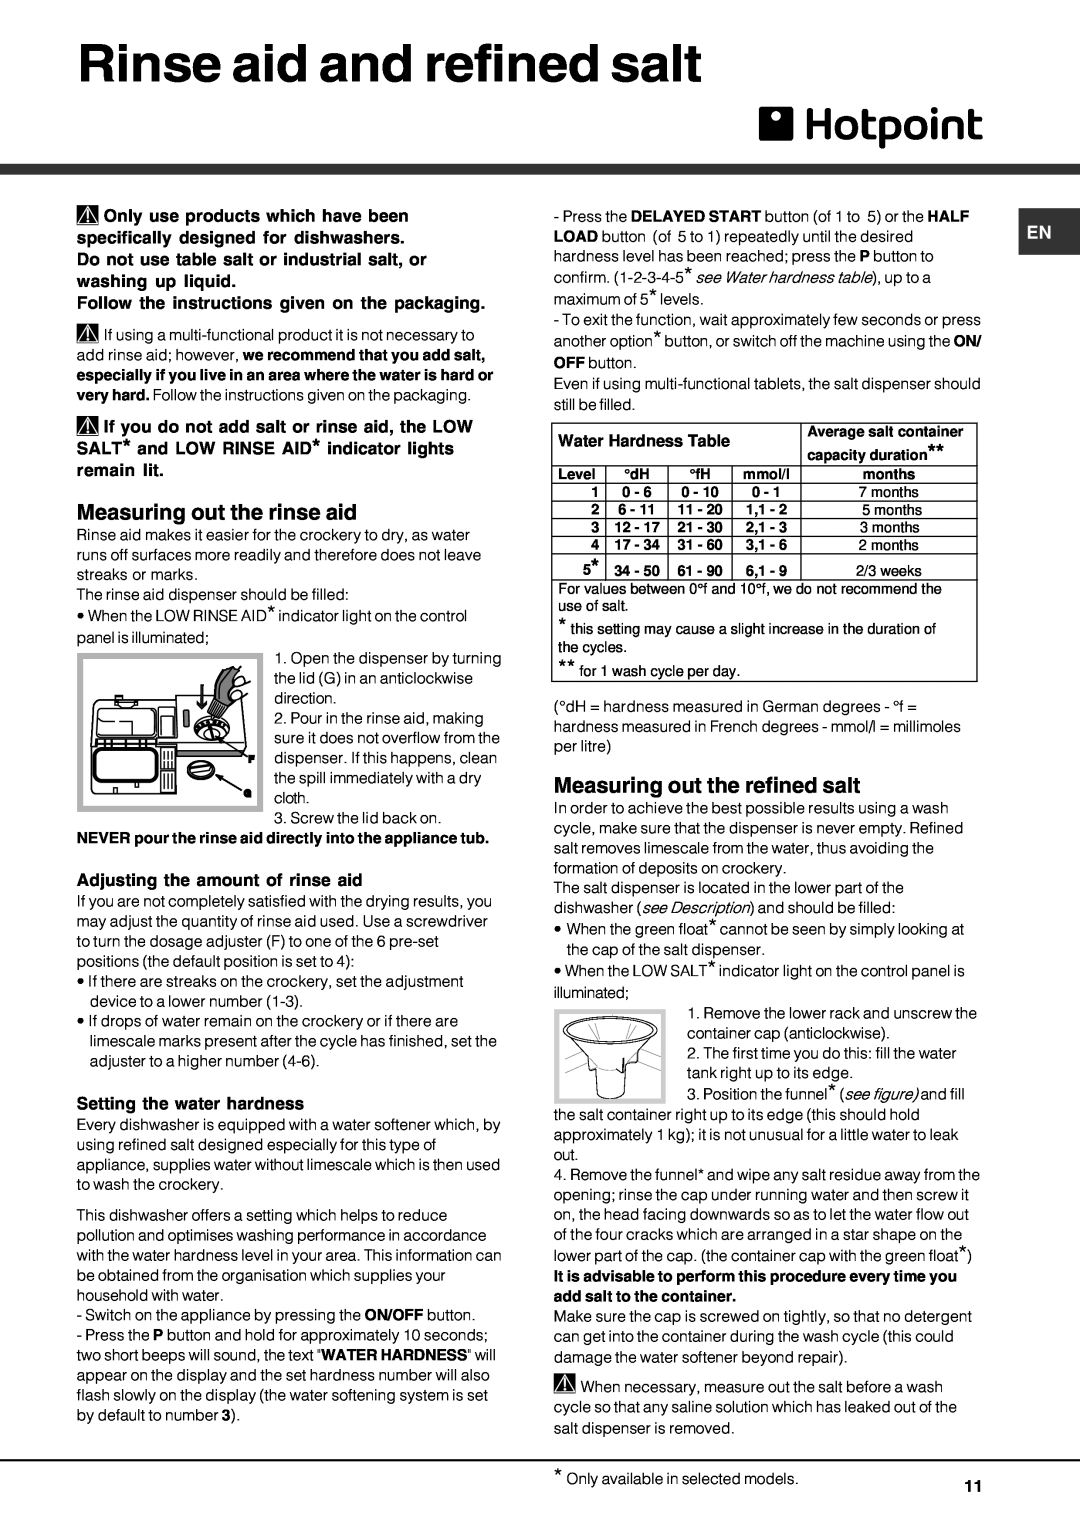 Hotpoint FDUD4212 manual Rinse aid and refined salt, Measuring out the rinse aid, Measuring out the refined salt 